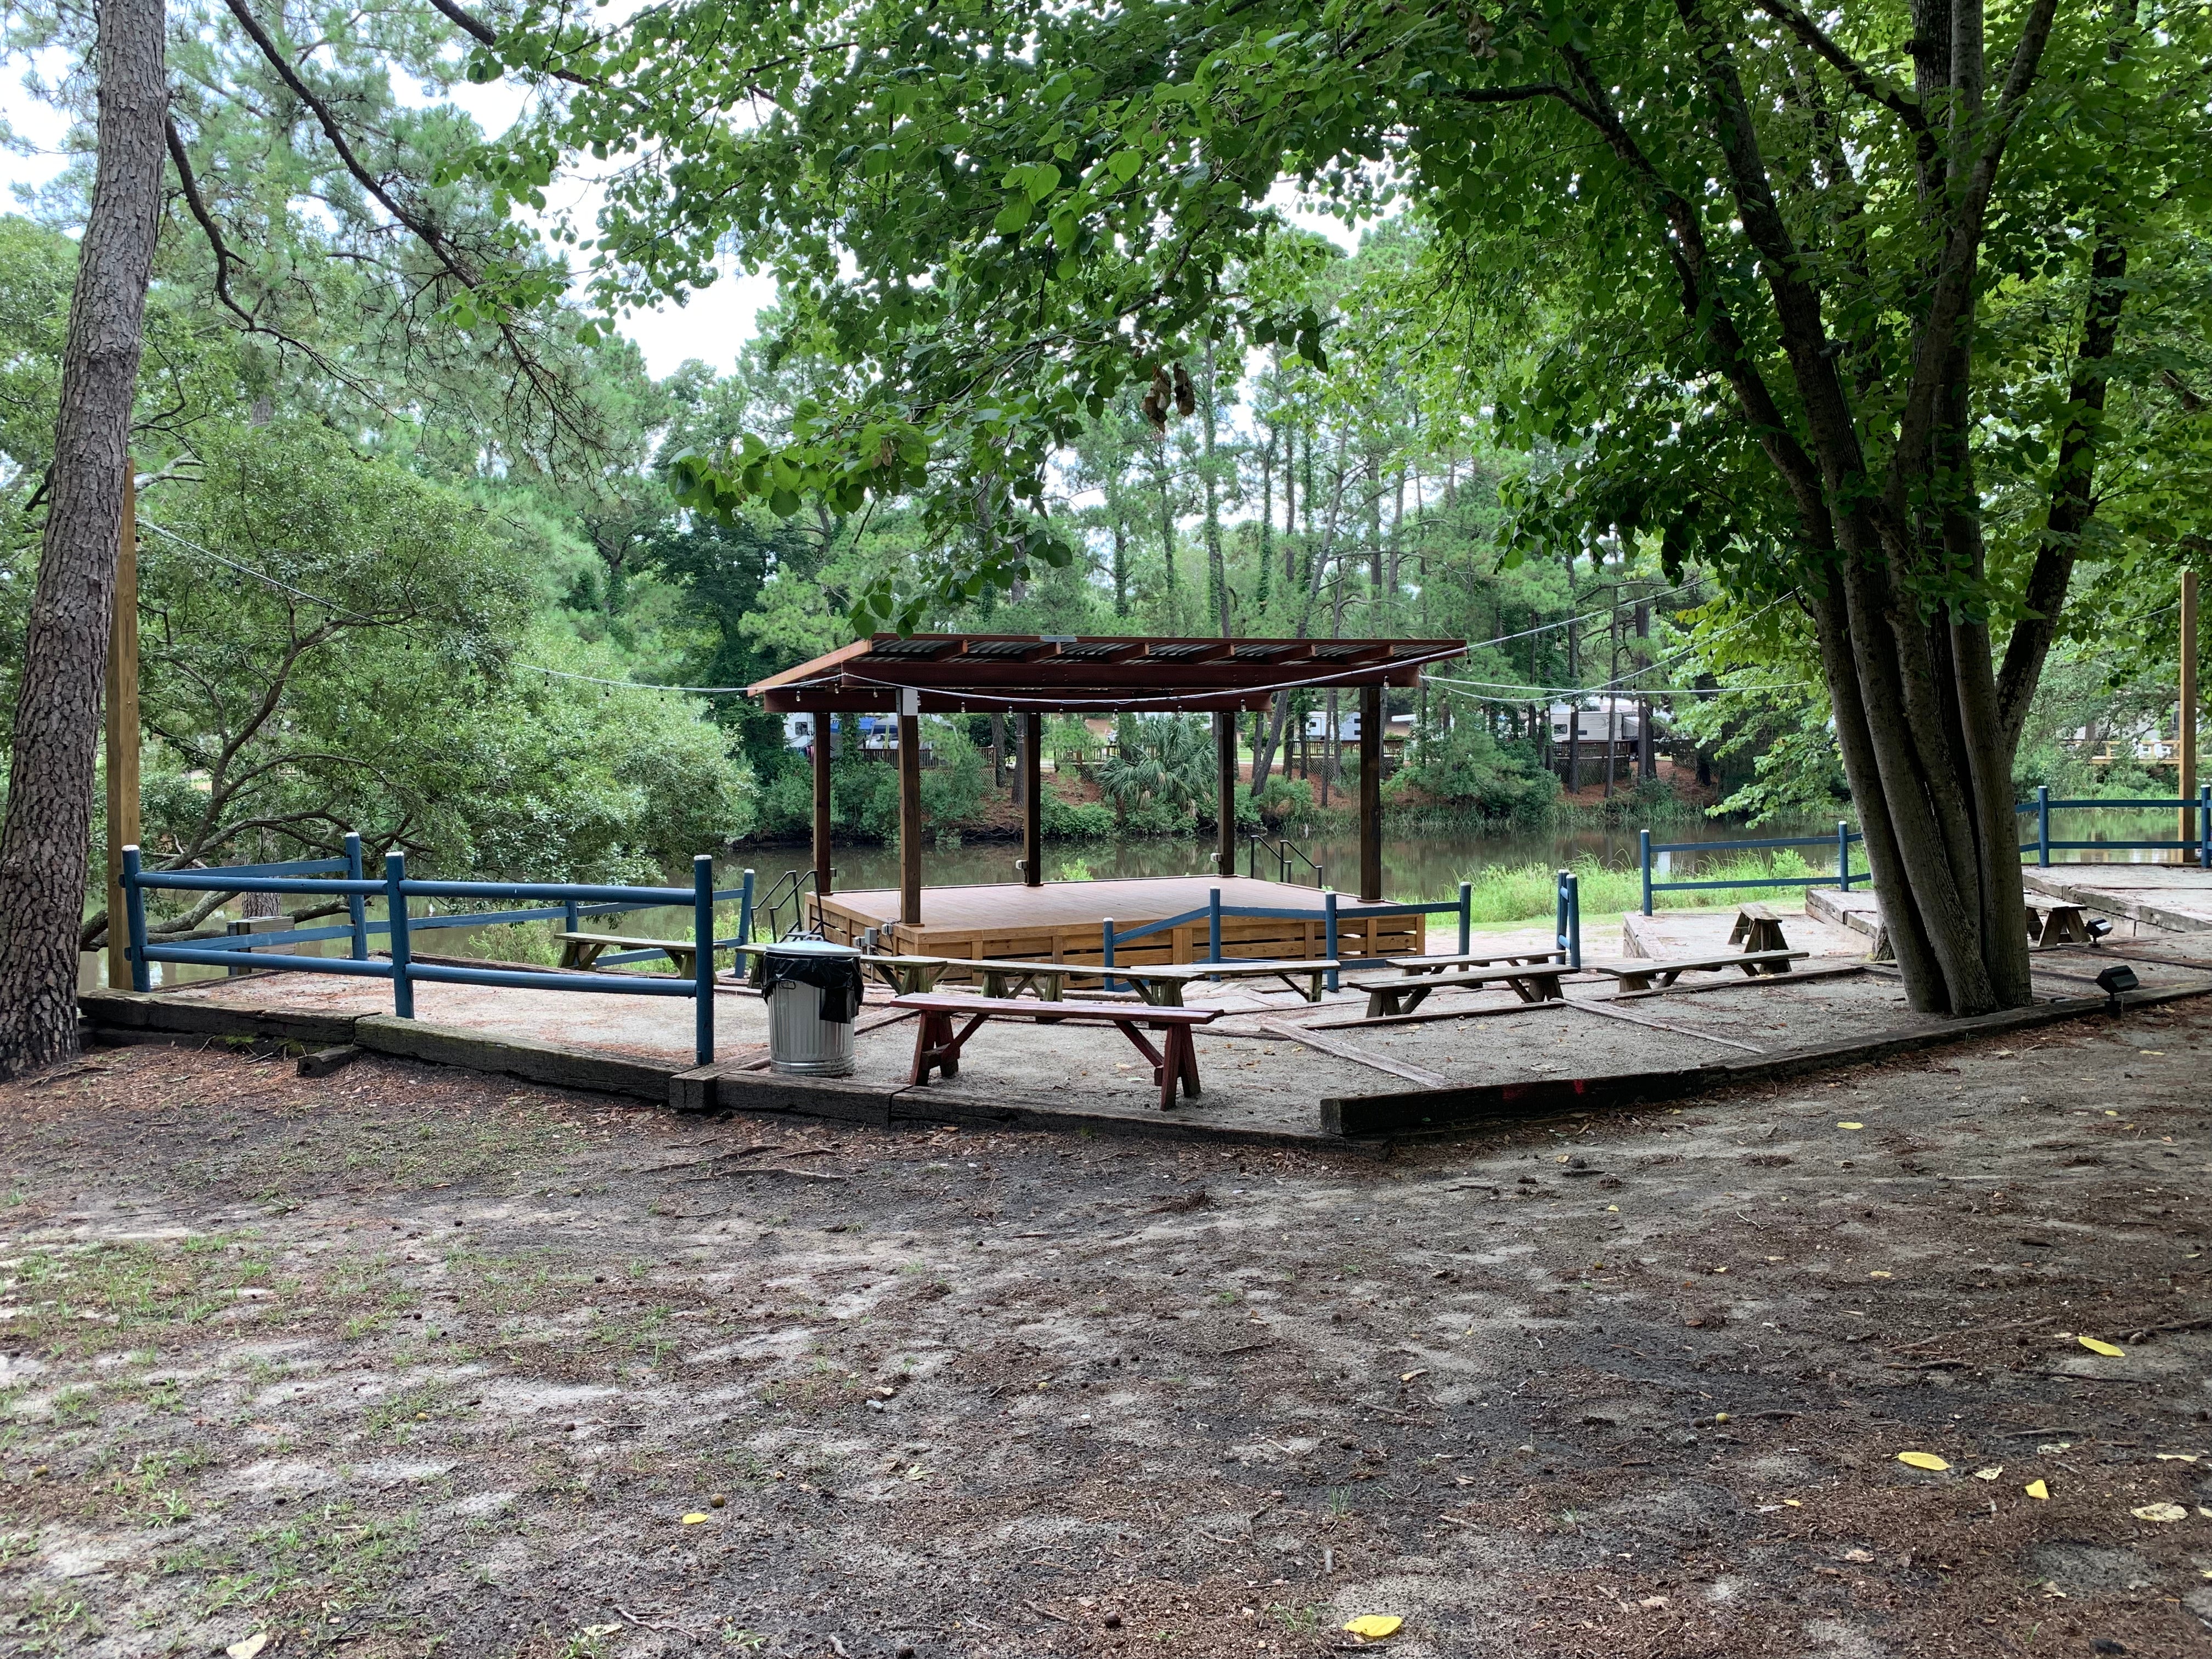 Amphitheater for live music and karaoke.